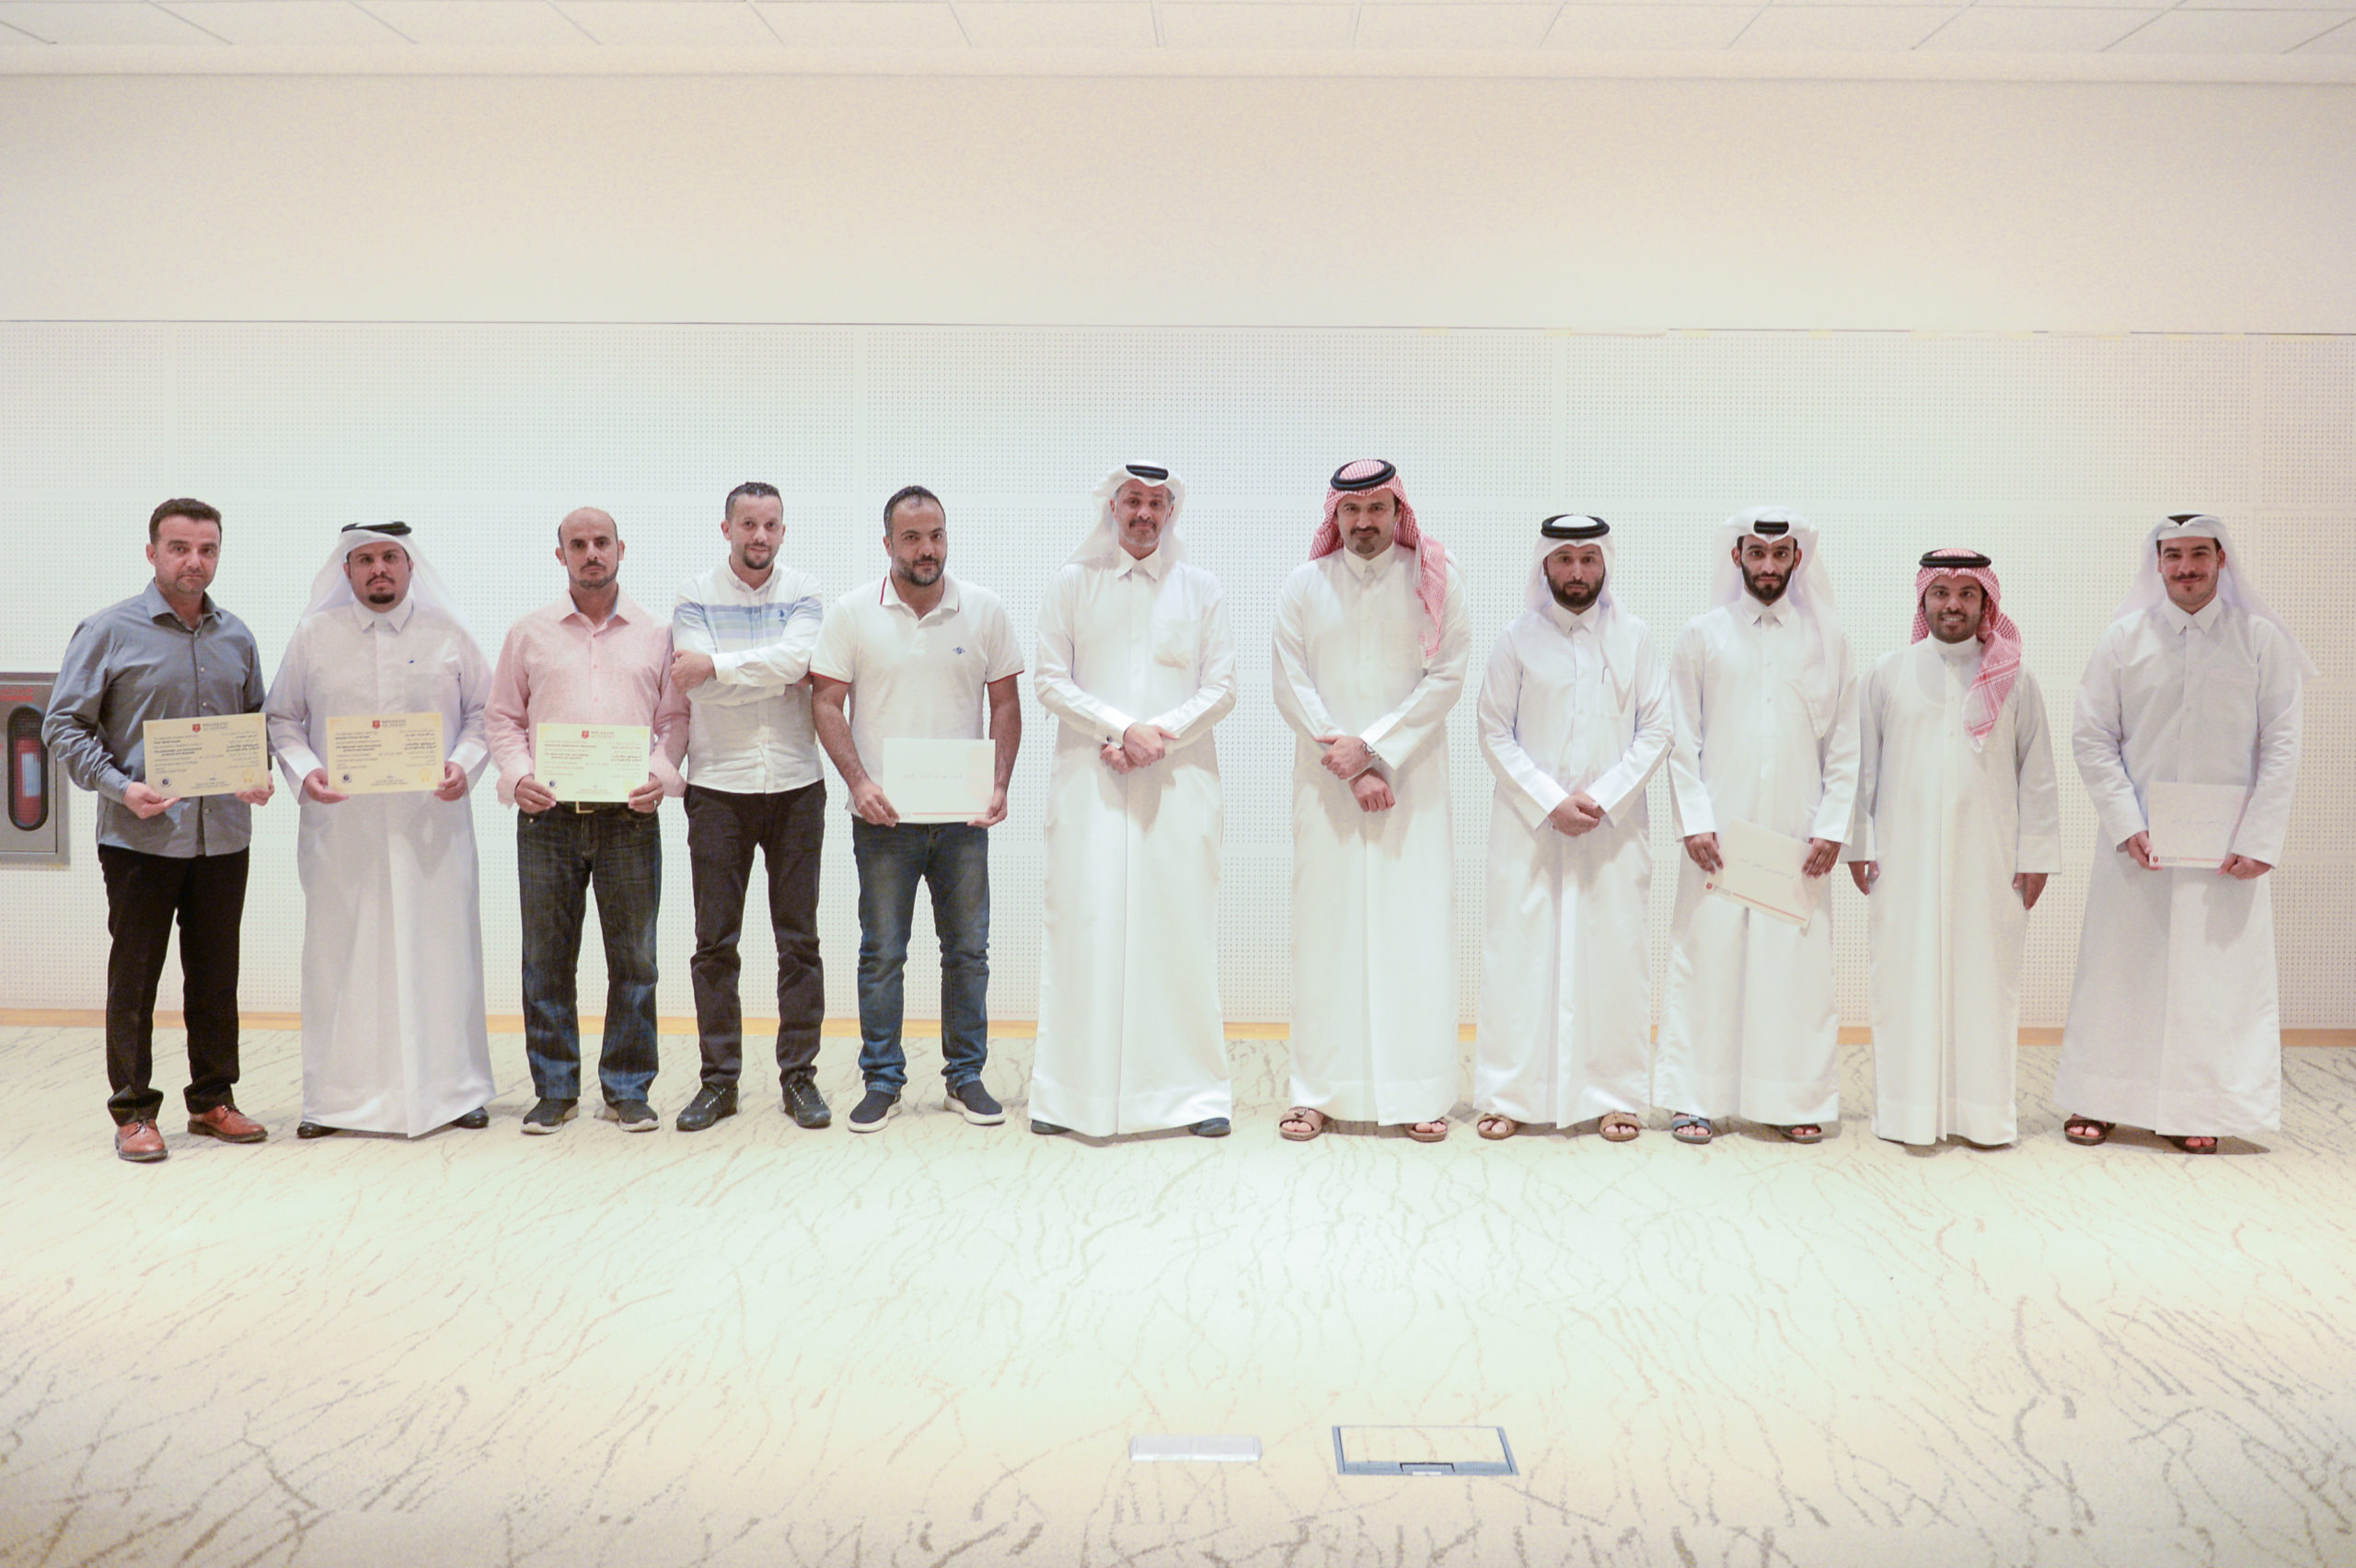 The international protocol and diplomacy etiquette training course at AlShaqab